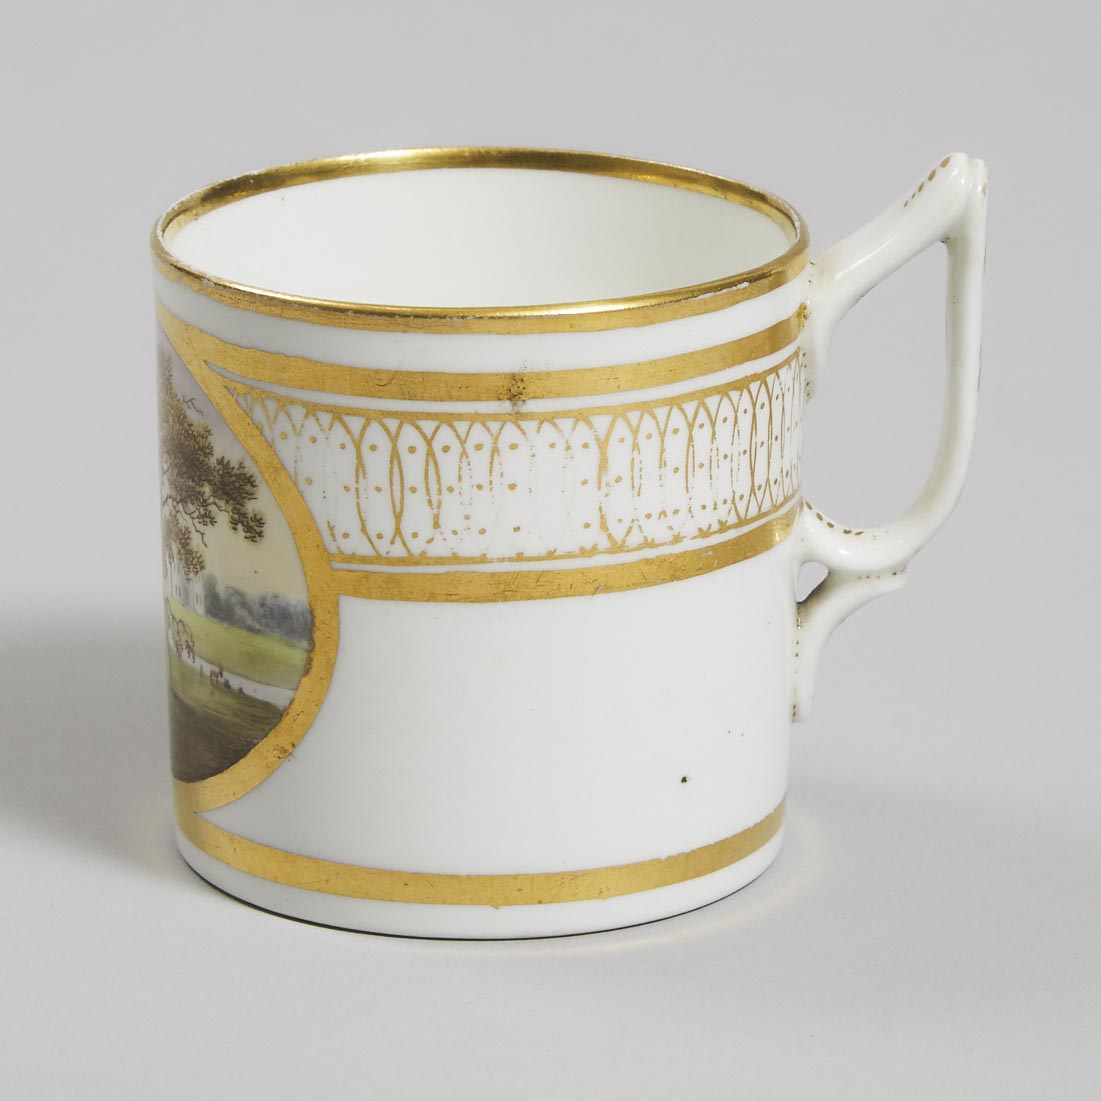 Derby Topographical Coffee Can, c.1800